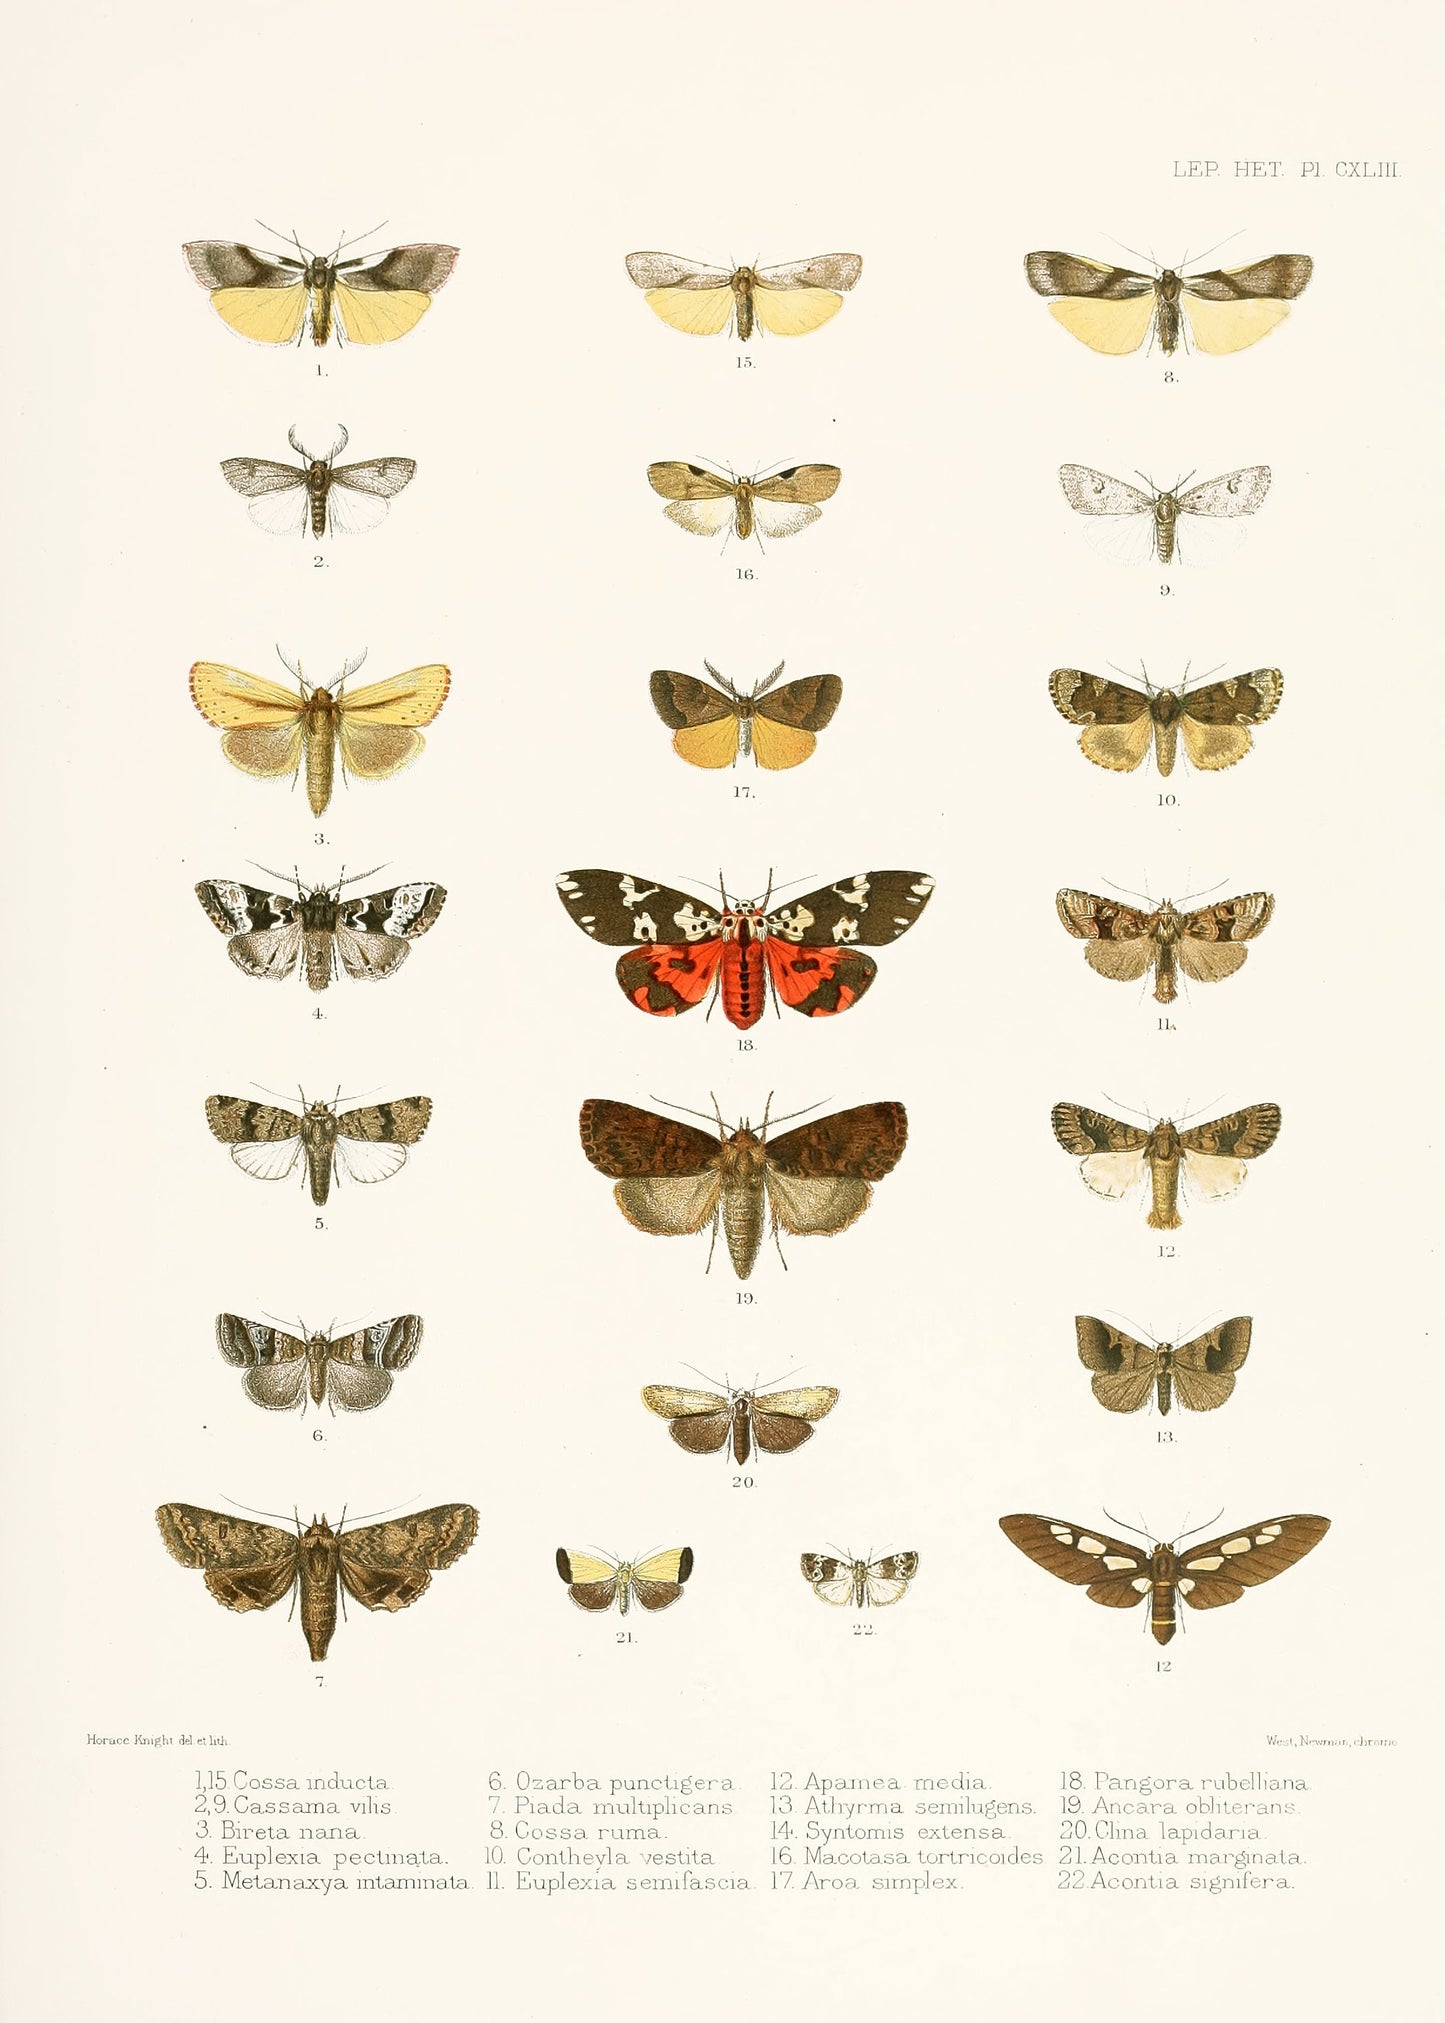 Illustrations of Typical Species of Lepidoptera [18 Images]